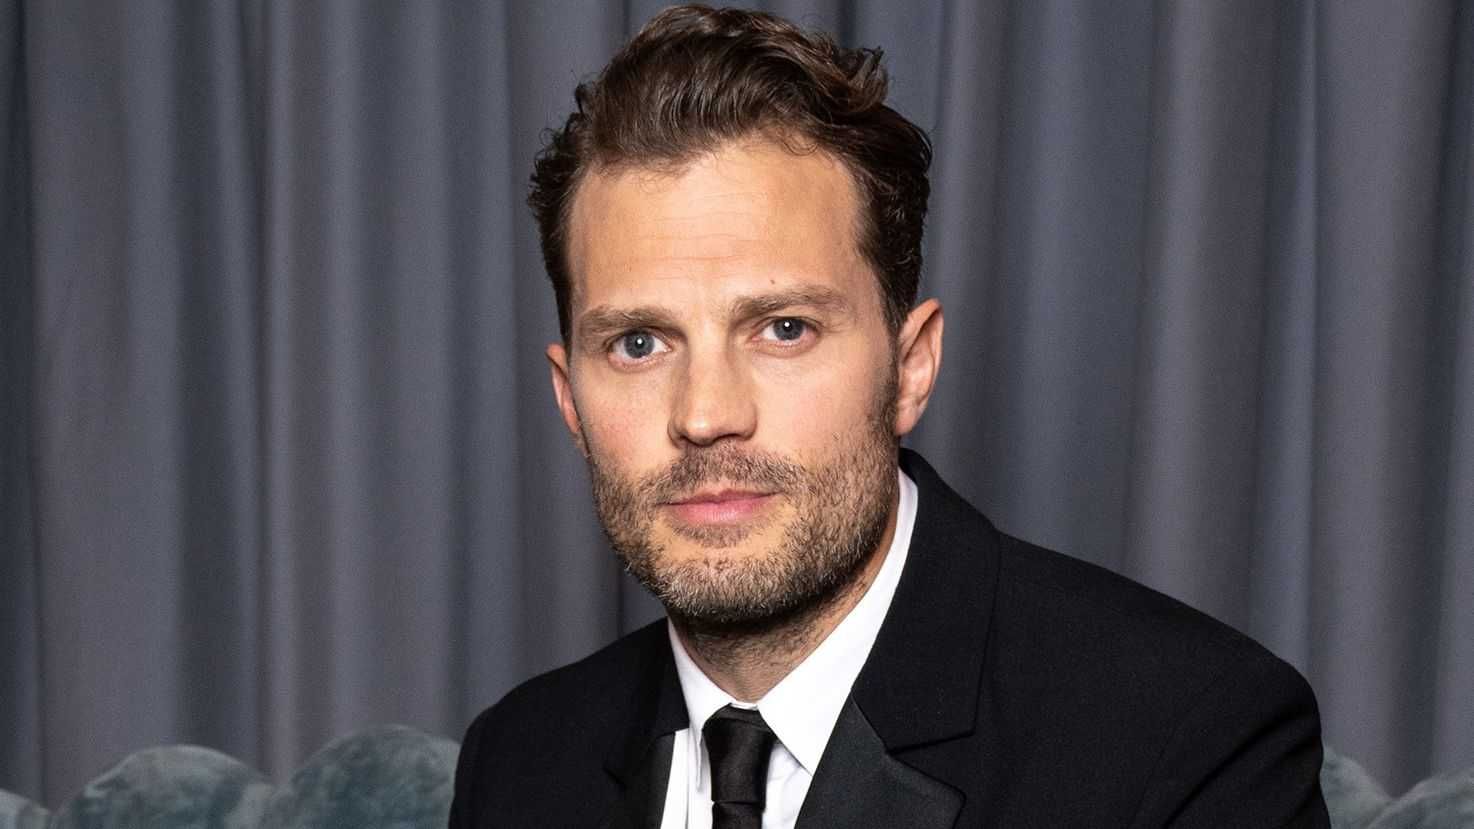 'I hope I didn't used to be an alcoholic' – Jamie Dornan's humor brings life to The Tourist